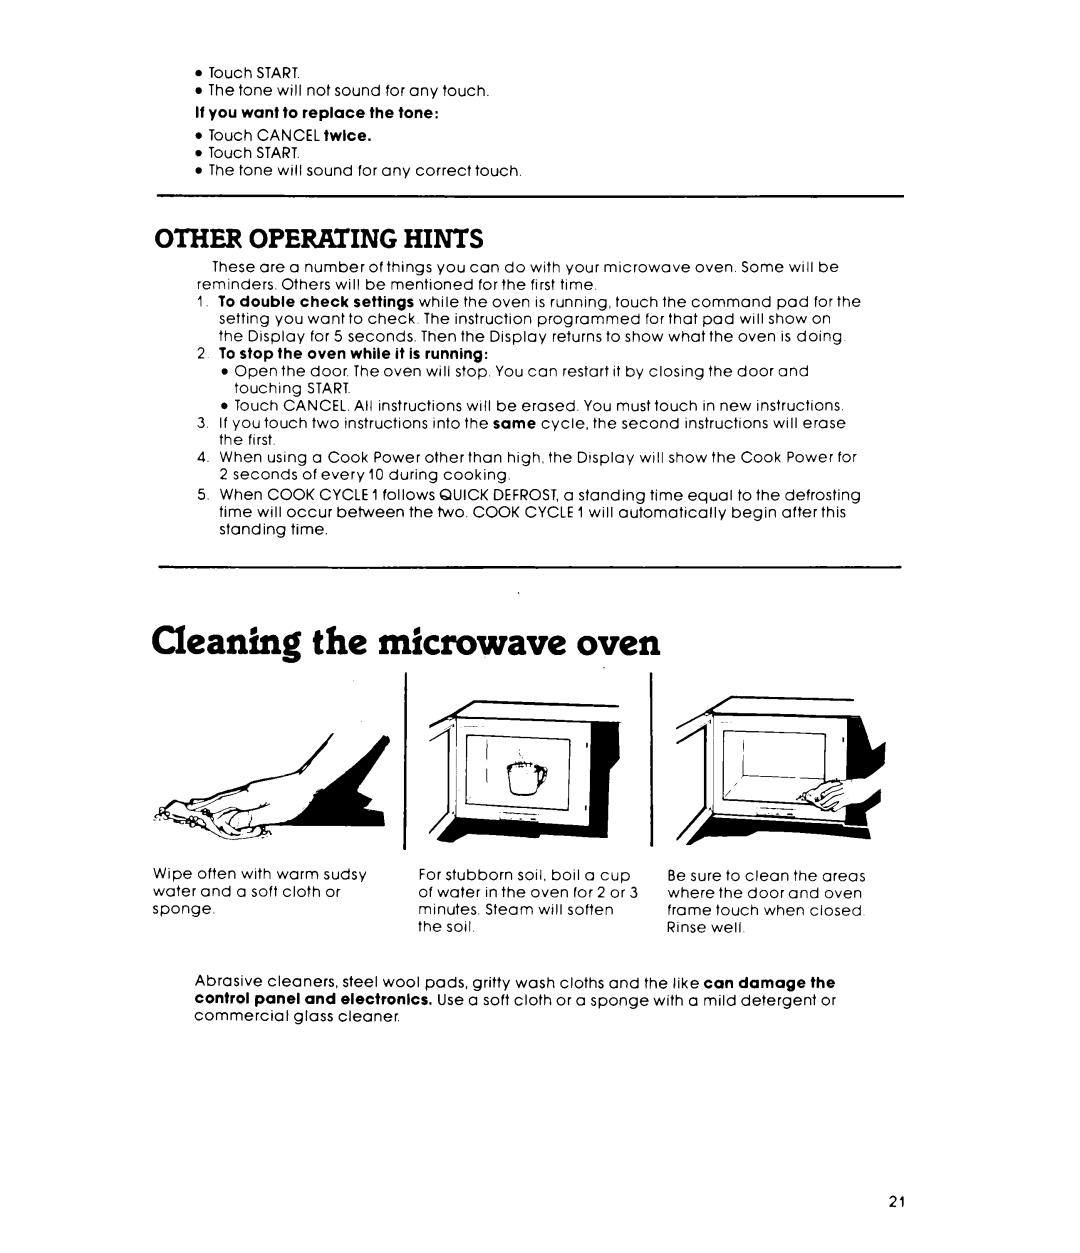 Whirlpool MW8750XL warranty Cleaning the microwave oven, Other Operating Hints 